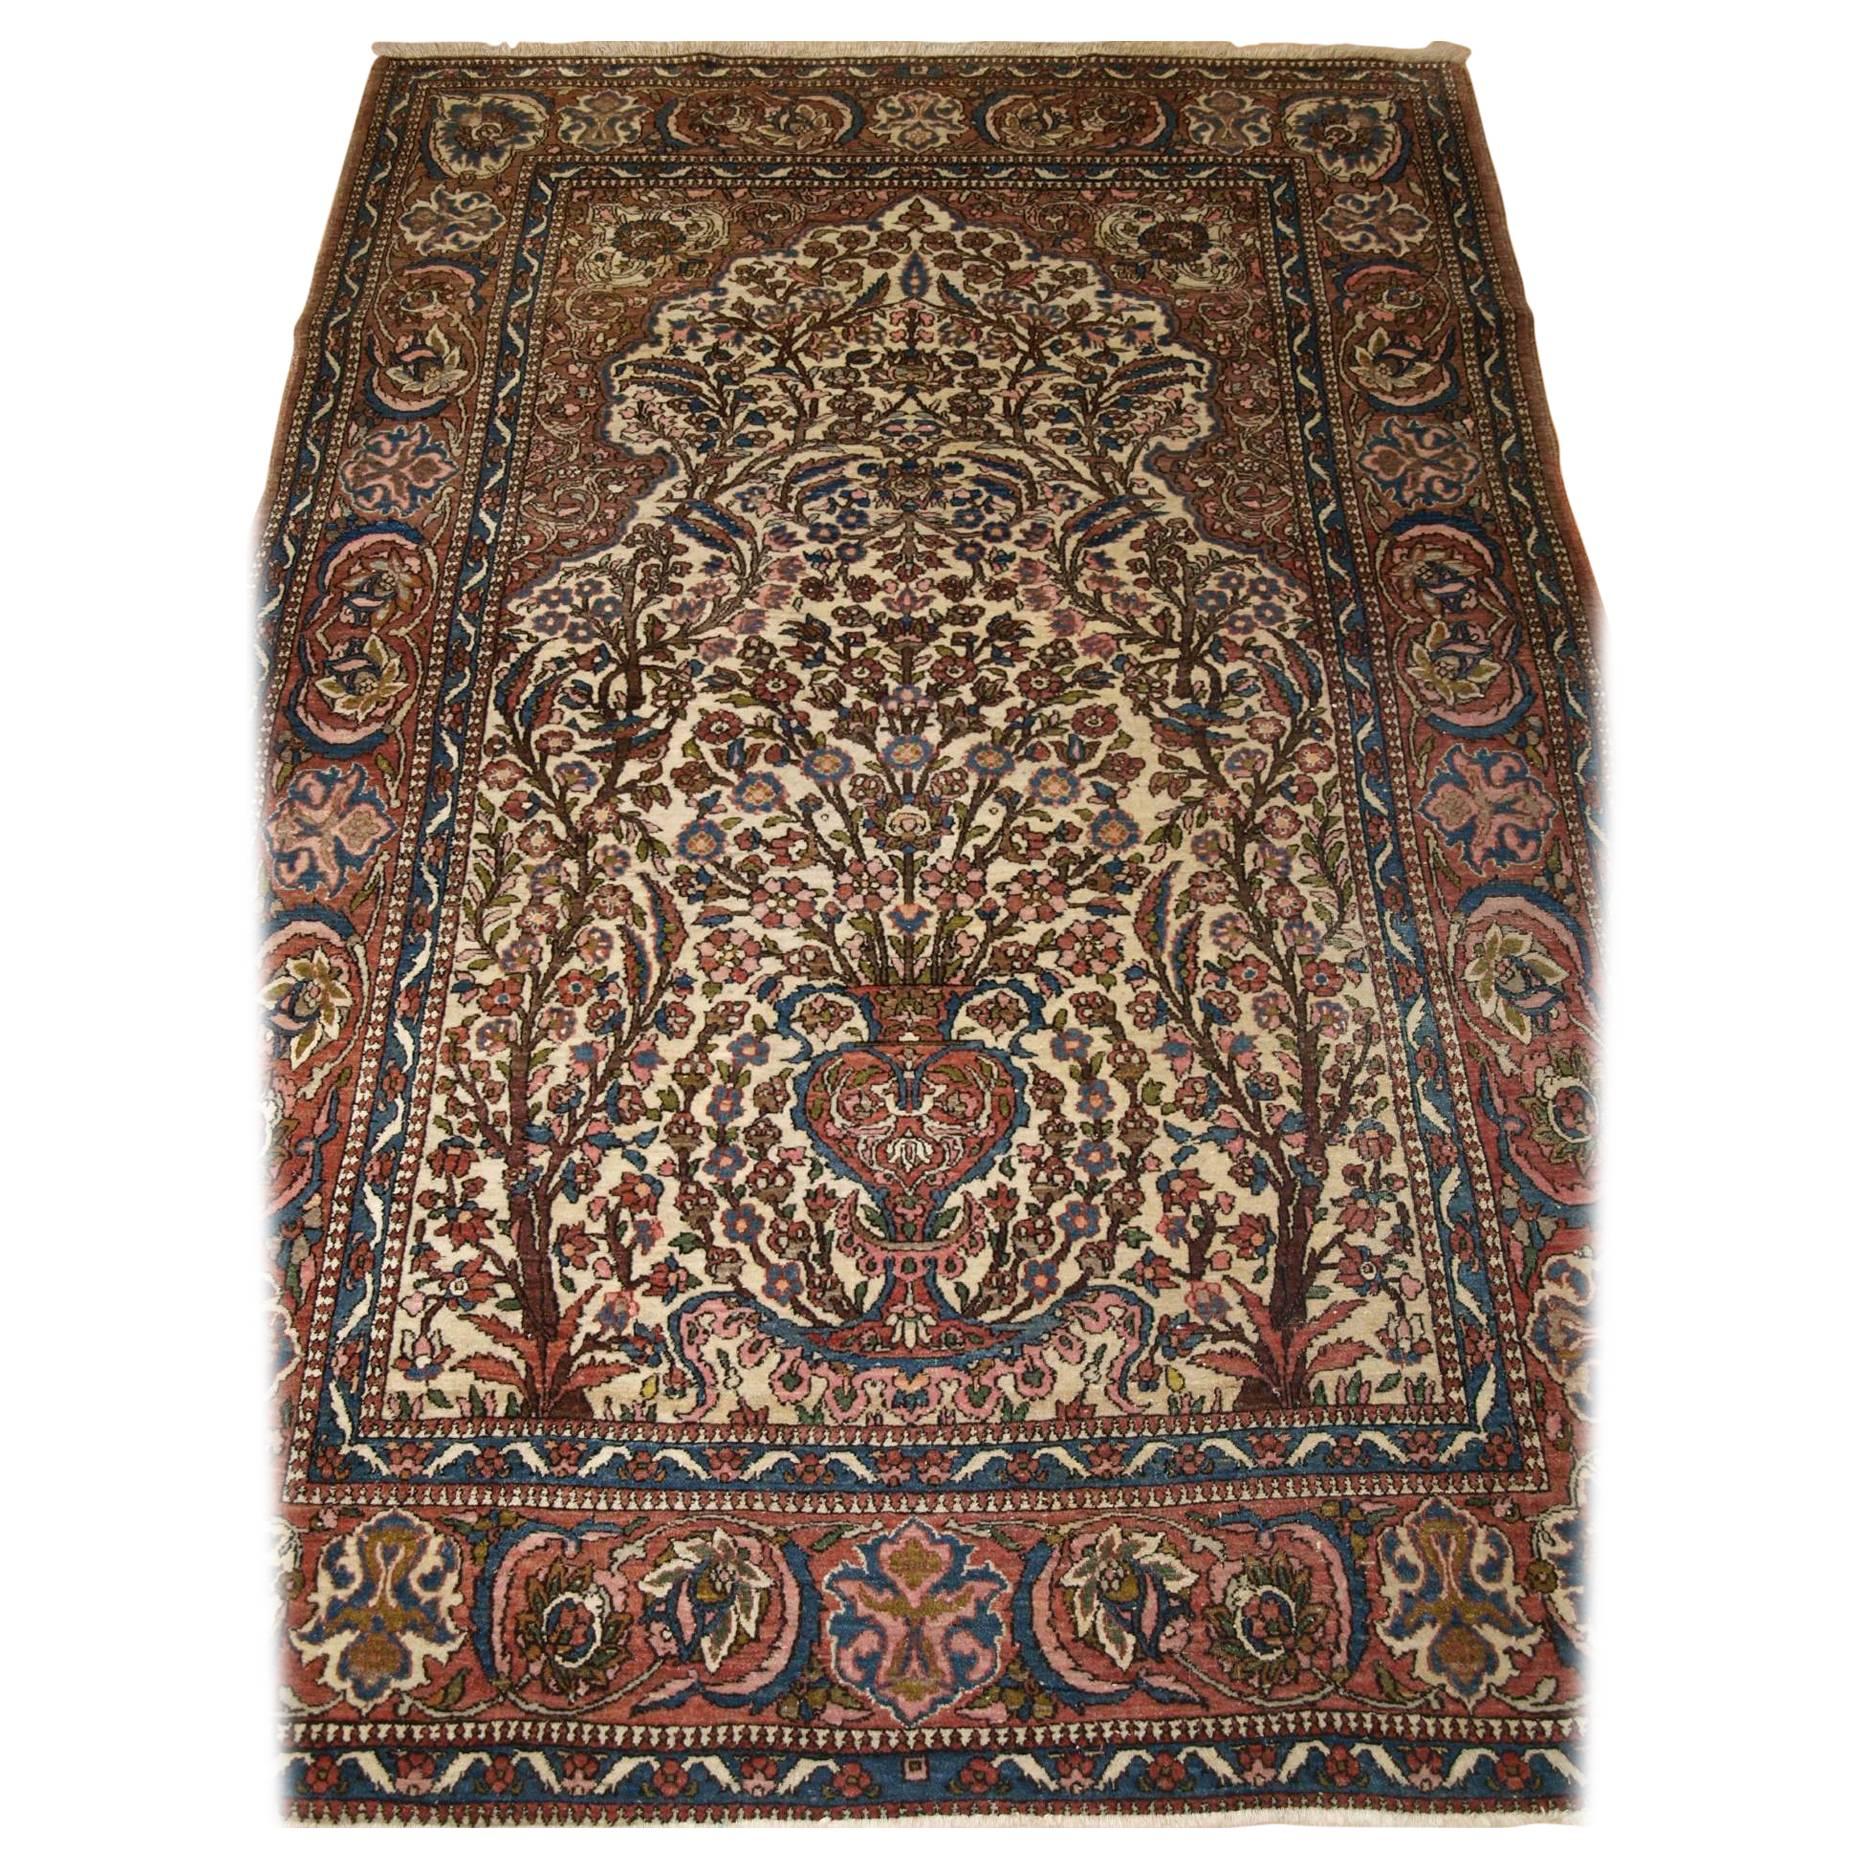 Isfahan Prayer Rug with a Very Traditional Floral Vase Design, circa 1900 For Sale